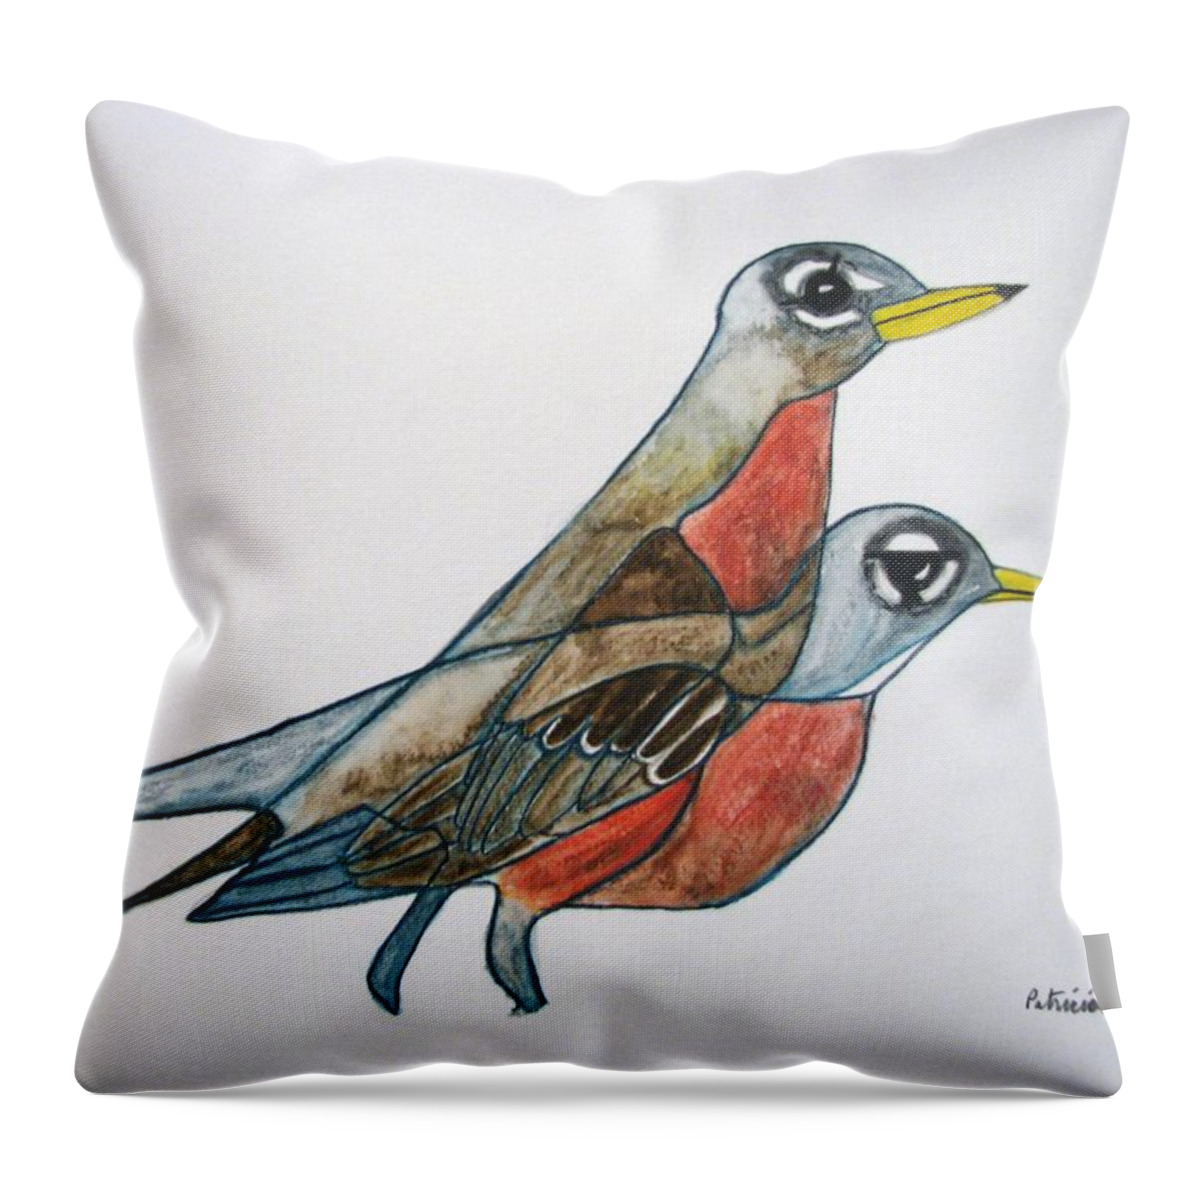  Throw Pillow featuring the painting Robins Partner by Patricia Arroyo